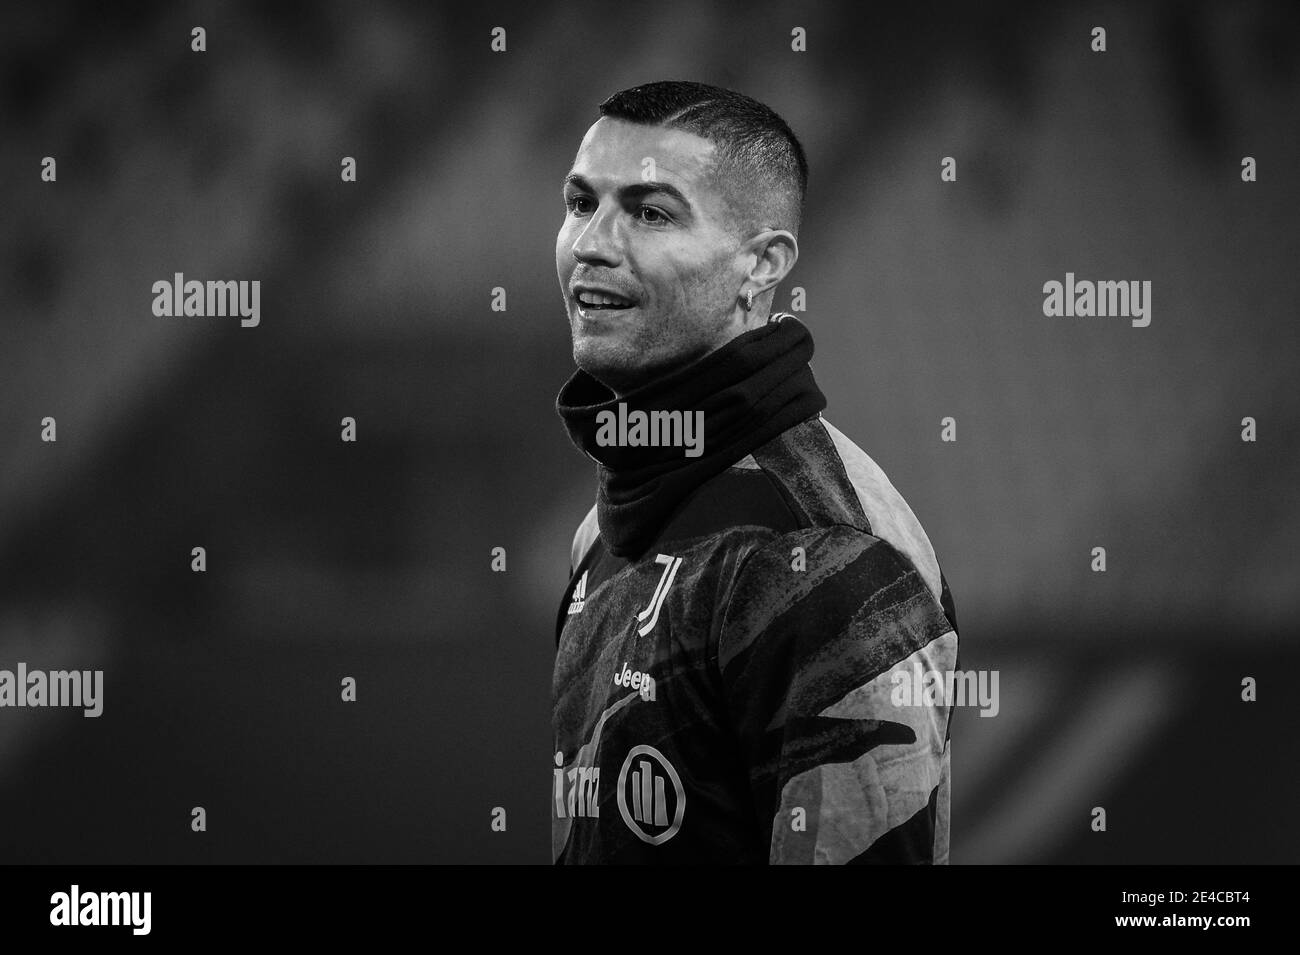 Portrait Of Cristiano Ronaldo In Black And White During The Warm